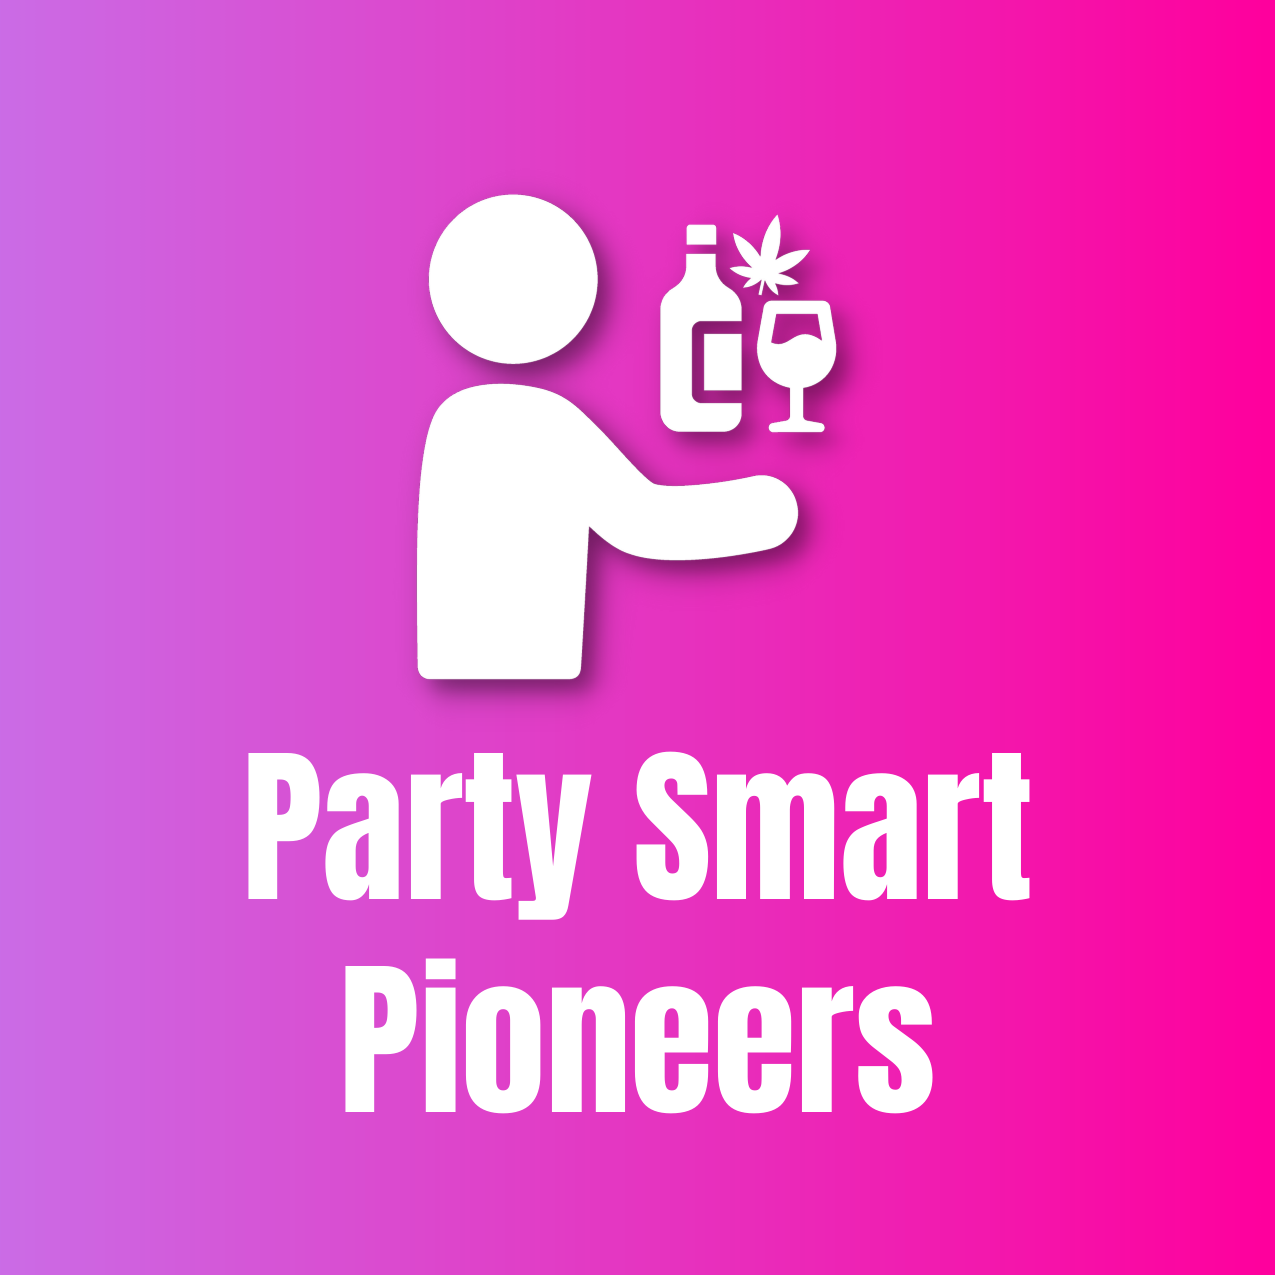 party smart pioneers